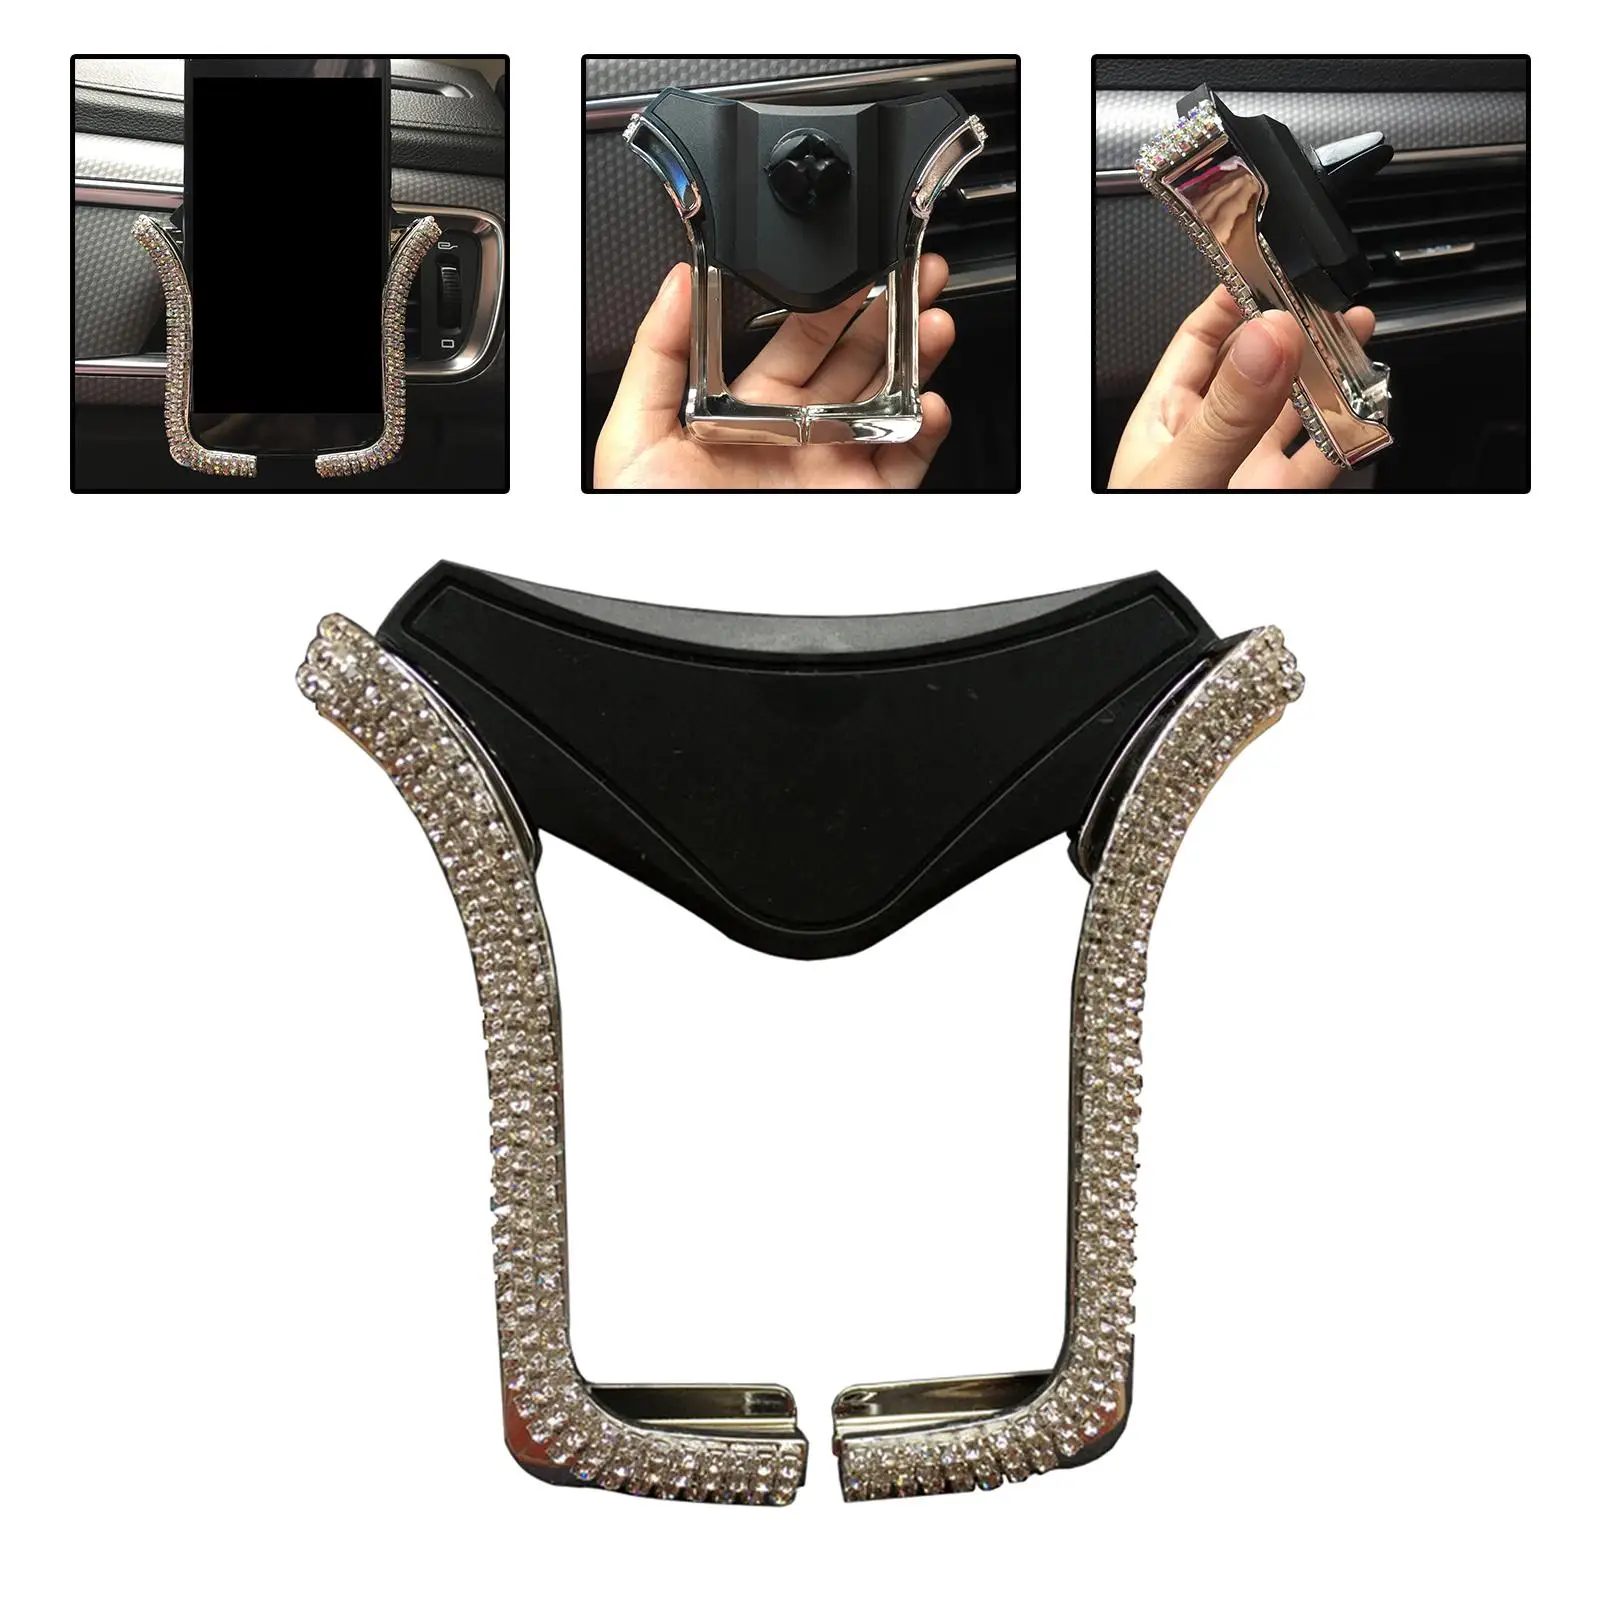 Bling Car Phone Holder Universal Adjustable Automatic Phone Holder for 4.0-6.5 inch Phones